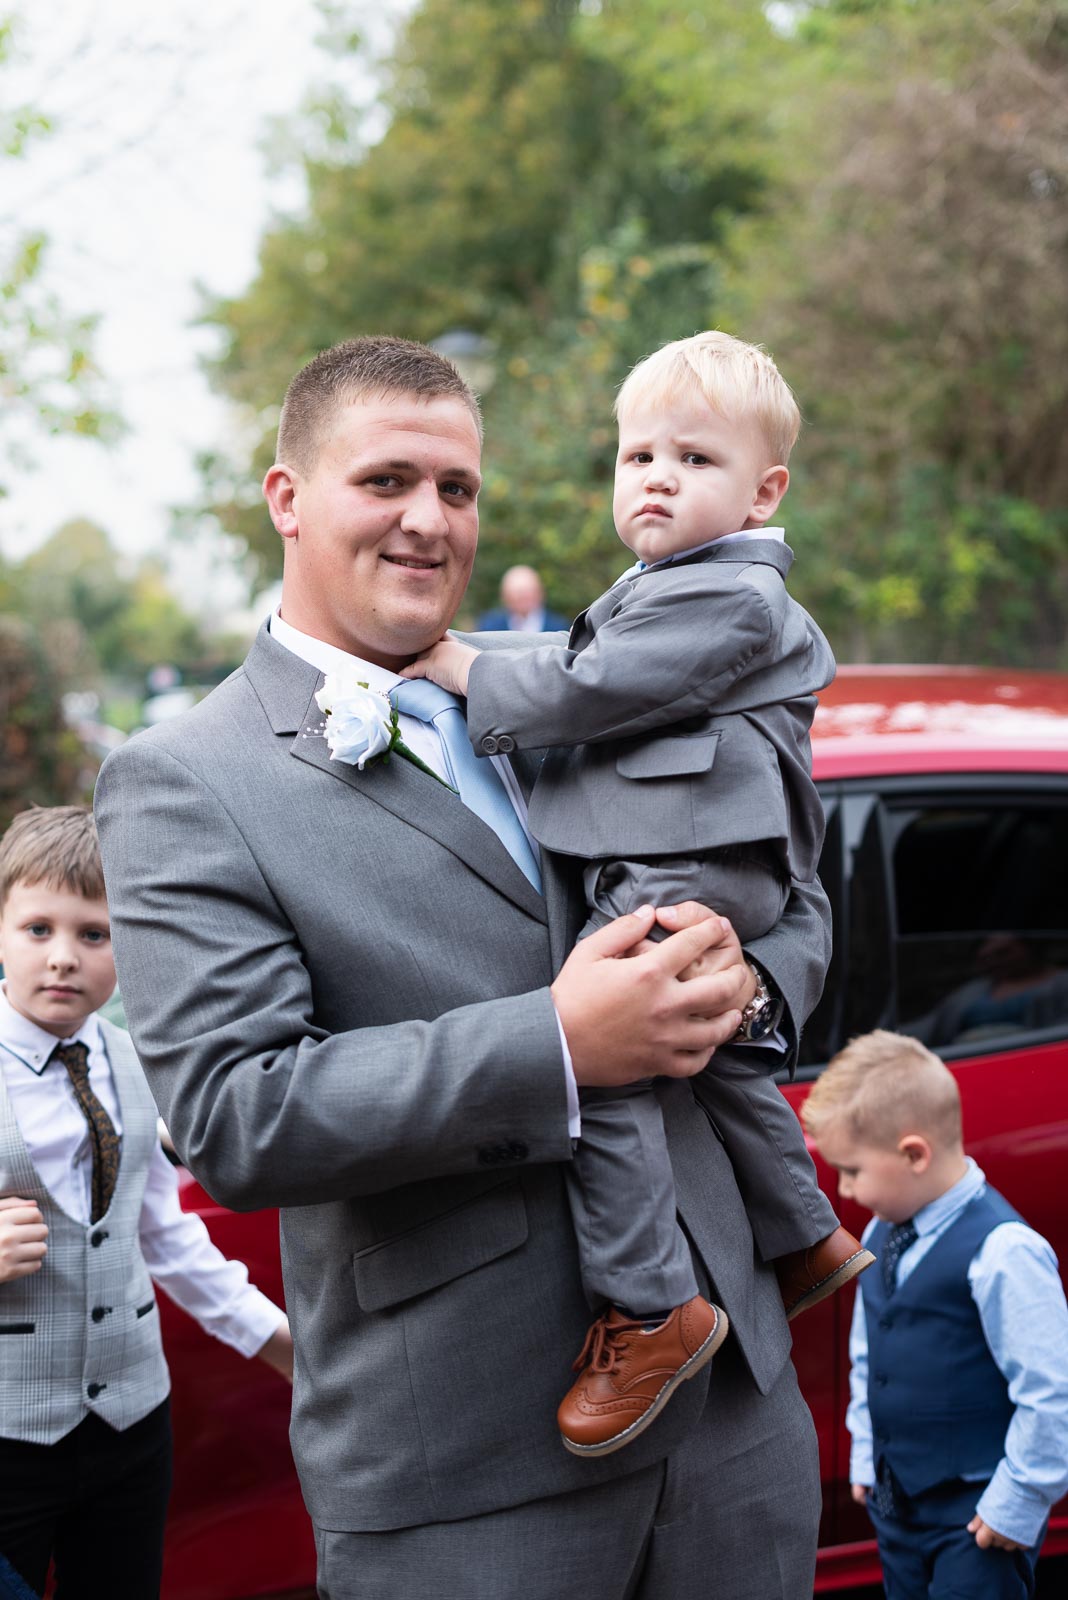 Jacob arrives at Lewes Register Office with his two year old son before his Wedding to Eliana.